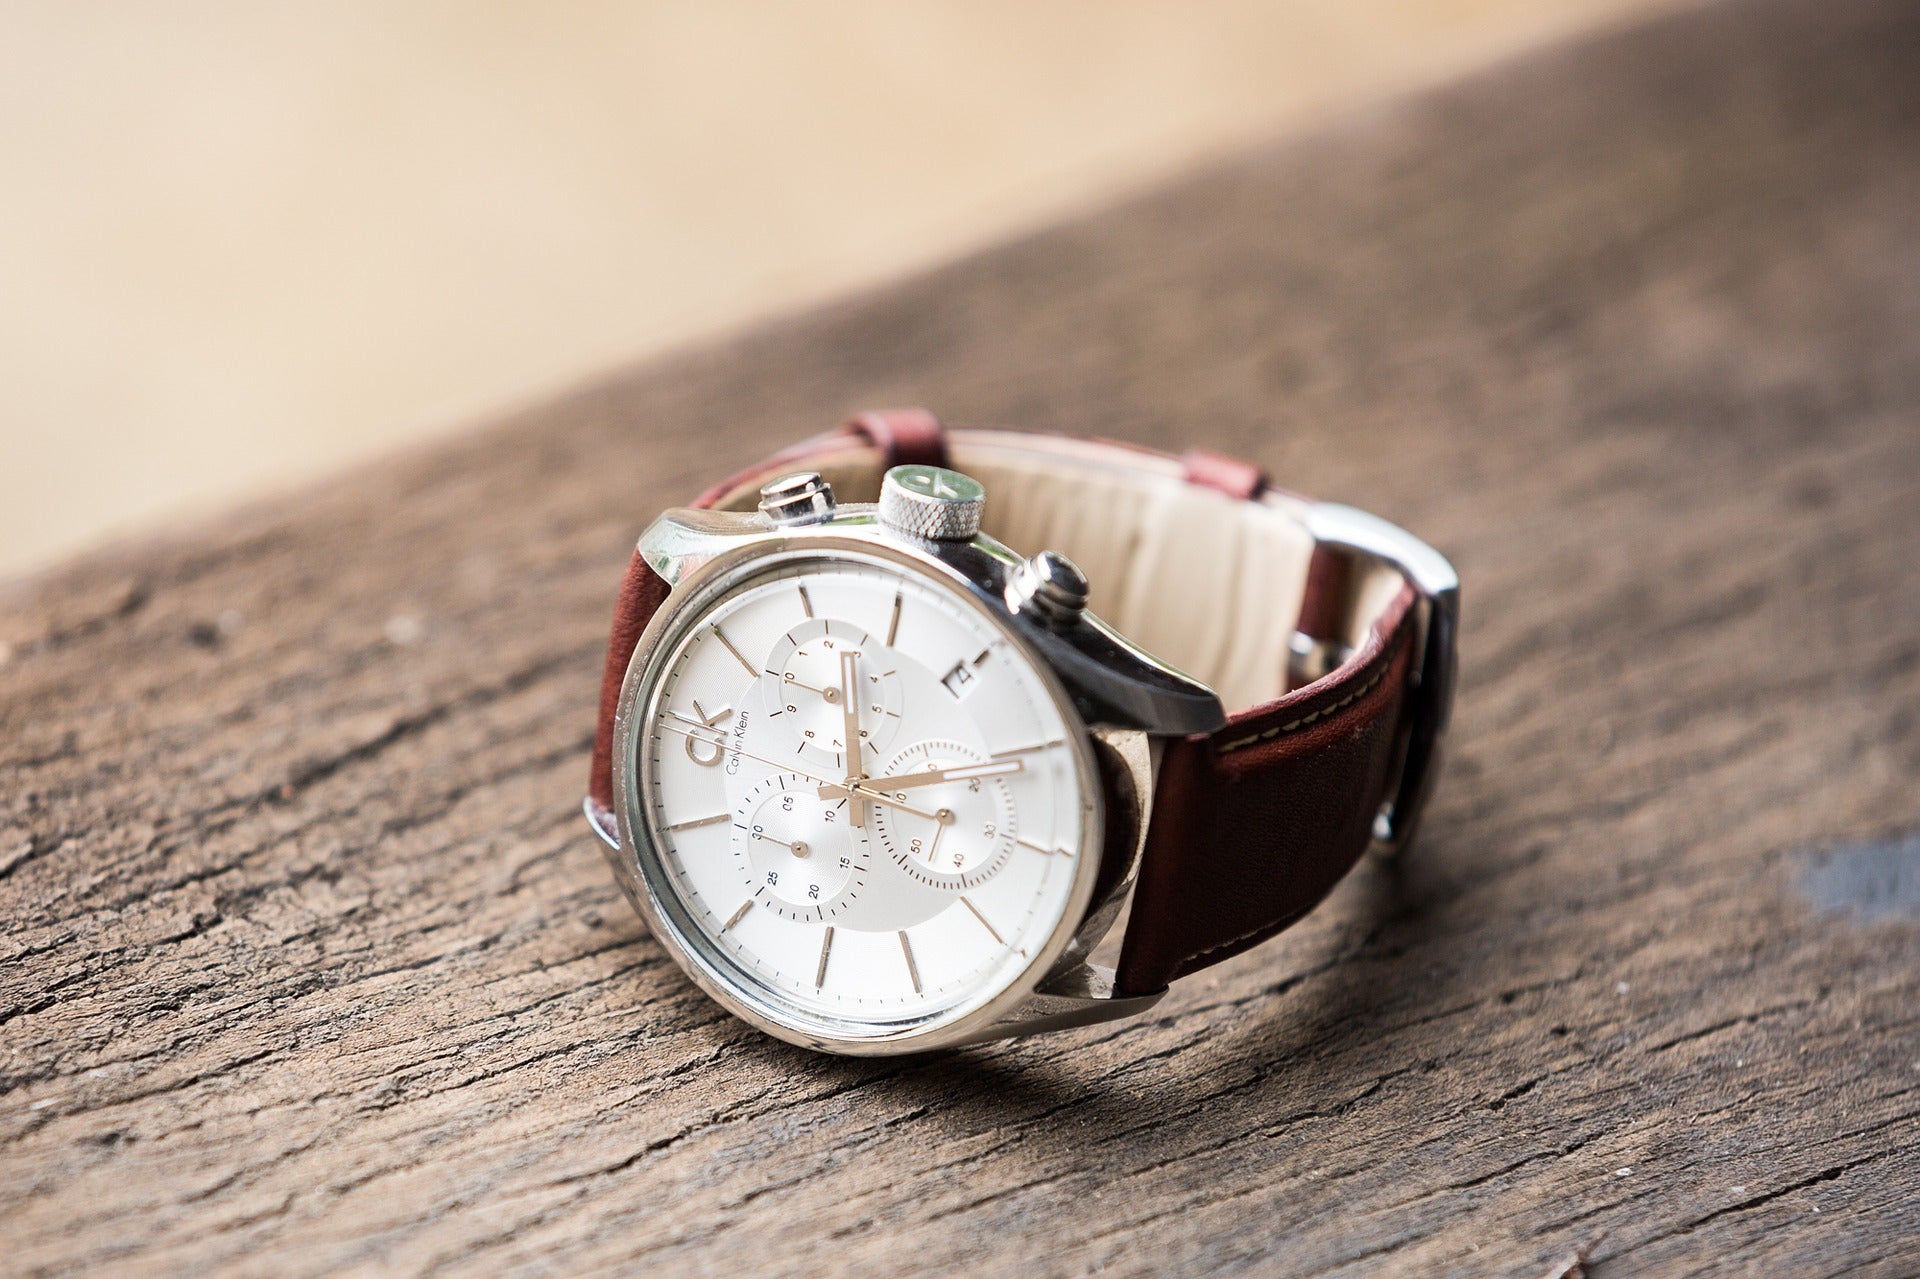 Your Guide To Watch Complications Part Five - Grand Complications